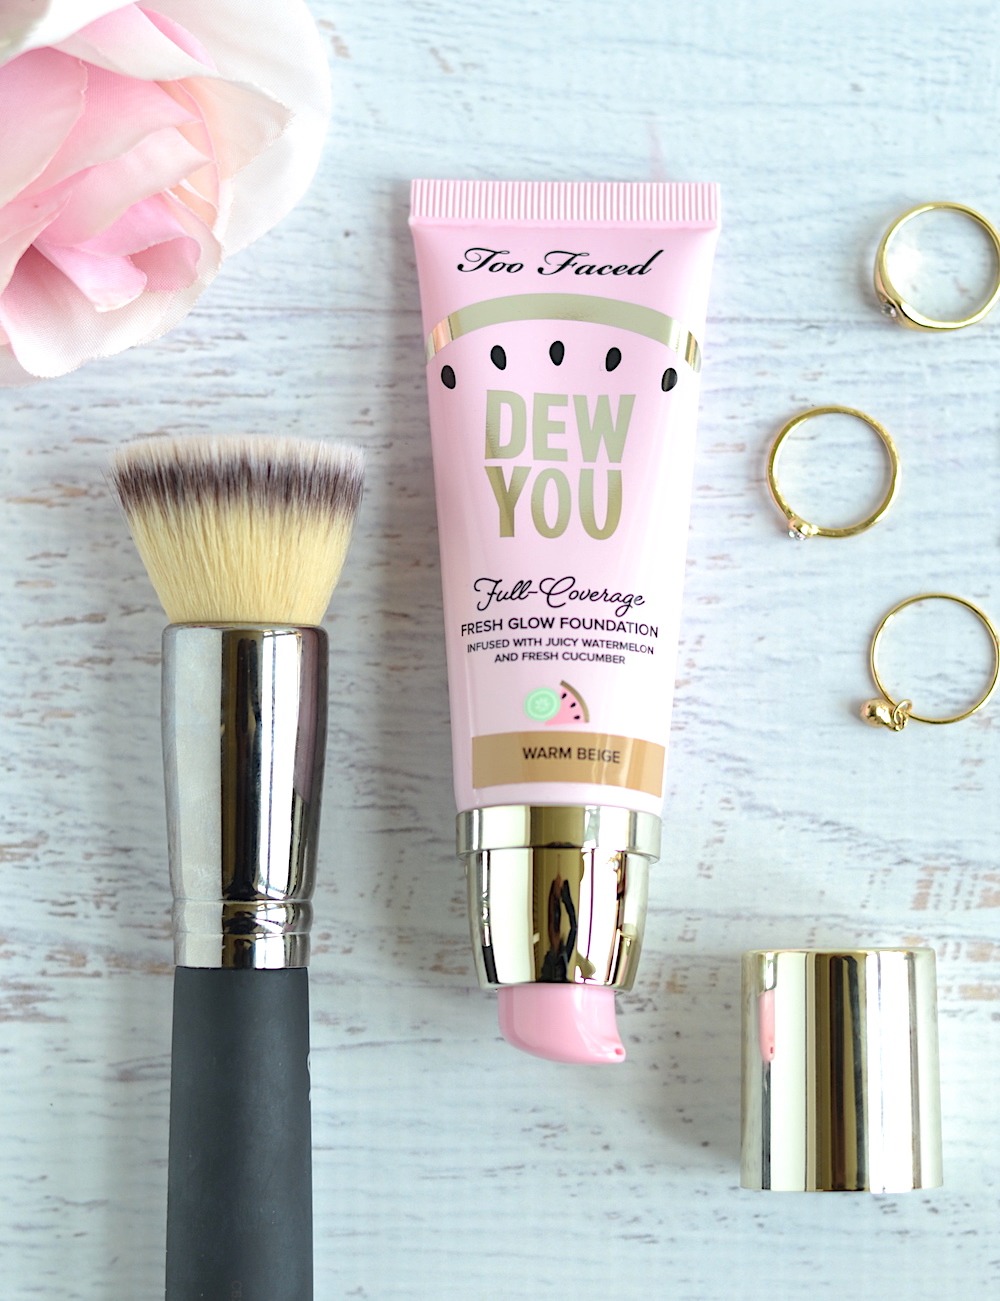  Too Faced Dew You Foundation review